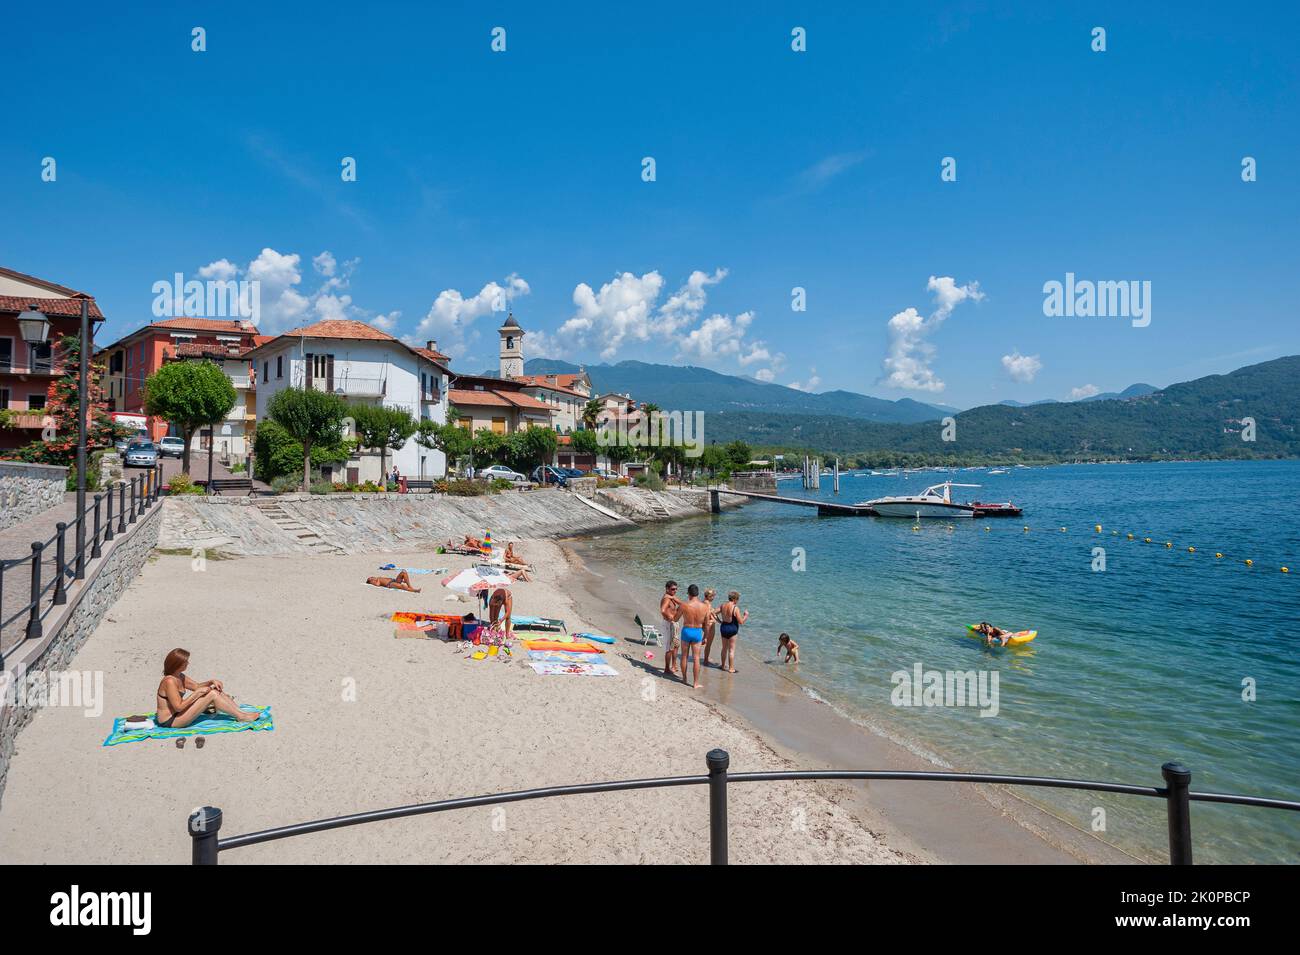 Townscape and beach, Feriolo, Piedmont, Italy, Europe | View of Feriolo on Lake Maggiore. Feriolo is a town in Piedmont in Northern Italy Stock Photo